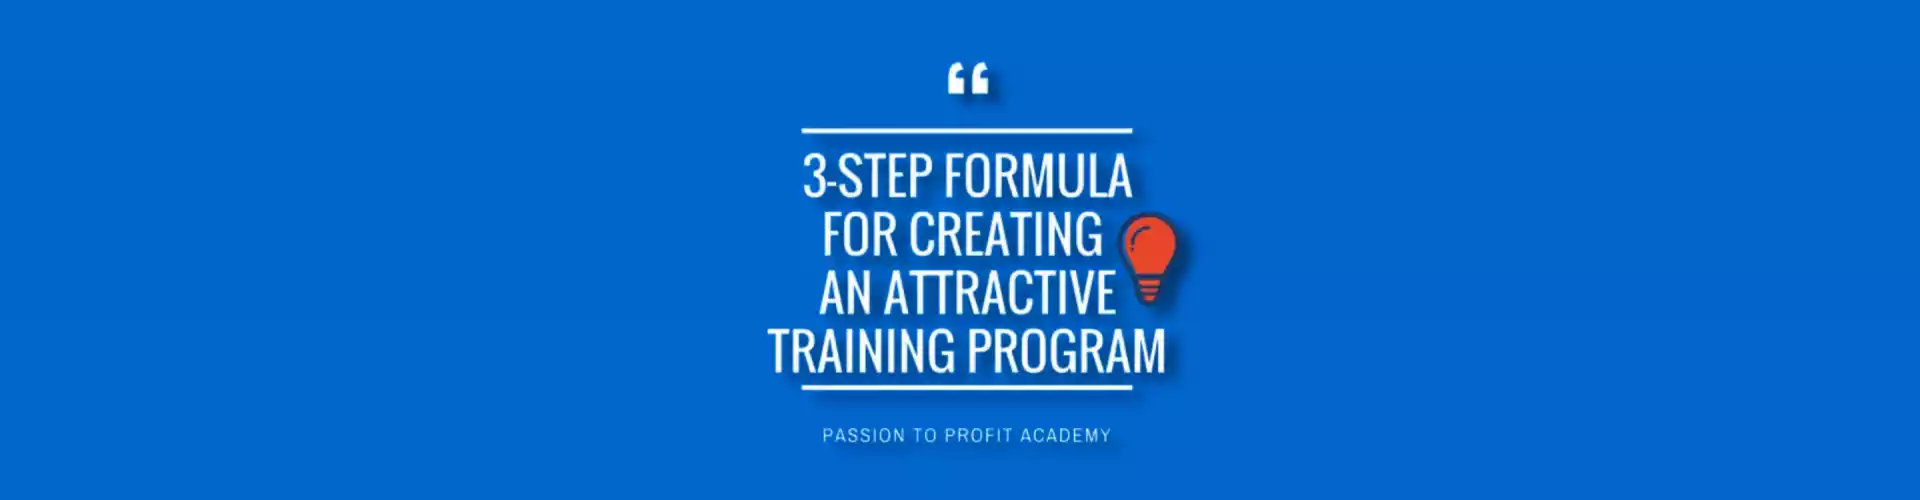 3-Step Formula For Creating An Attractive Training Program - Multilingual